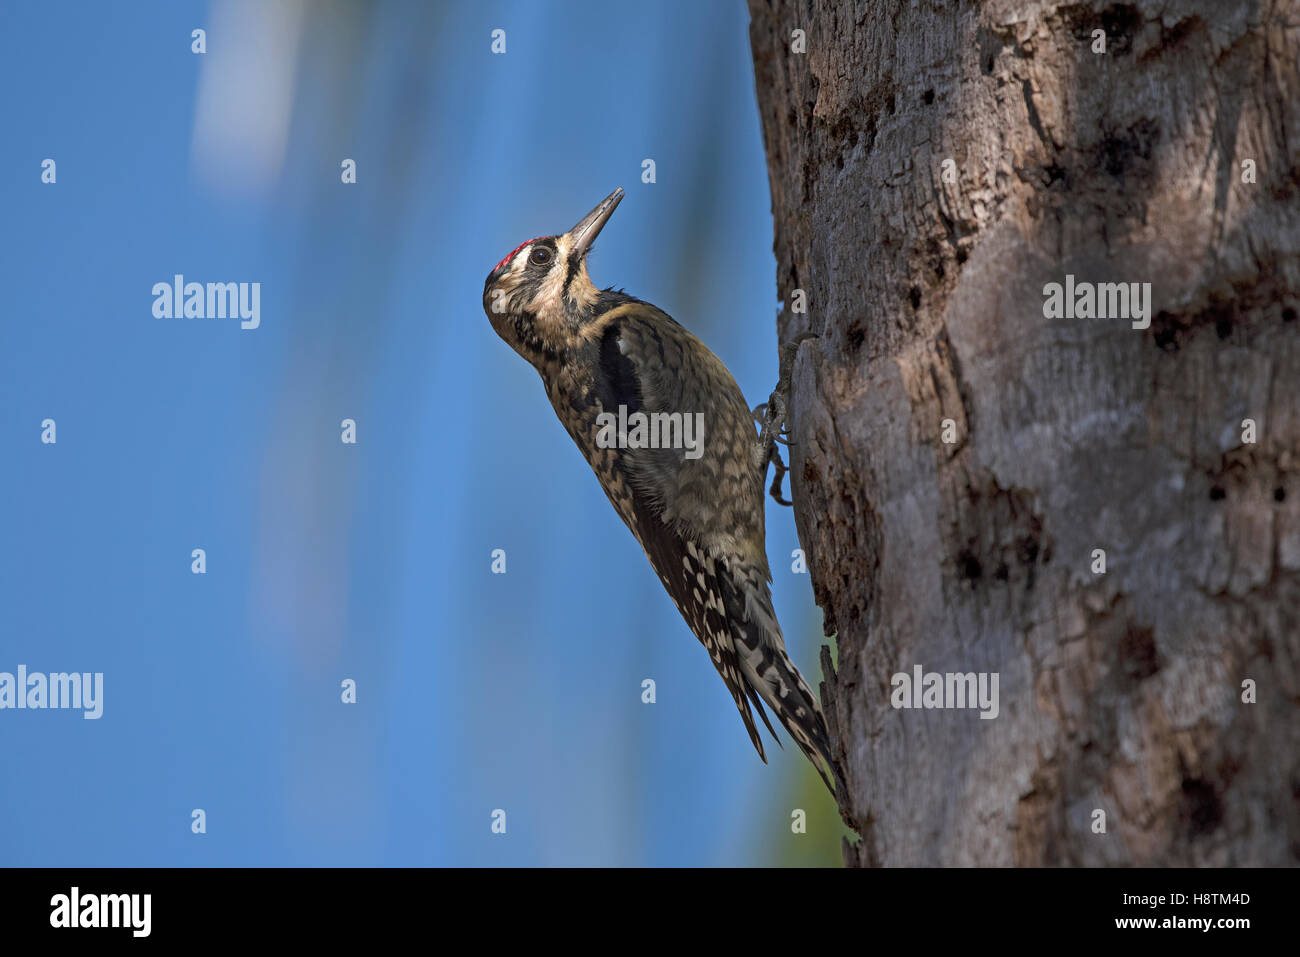 A Ladder Backed Woodpecker forages on a palm tree Florida USA Stock Photo